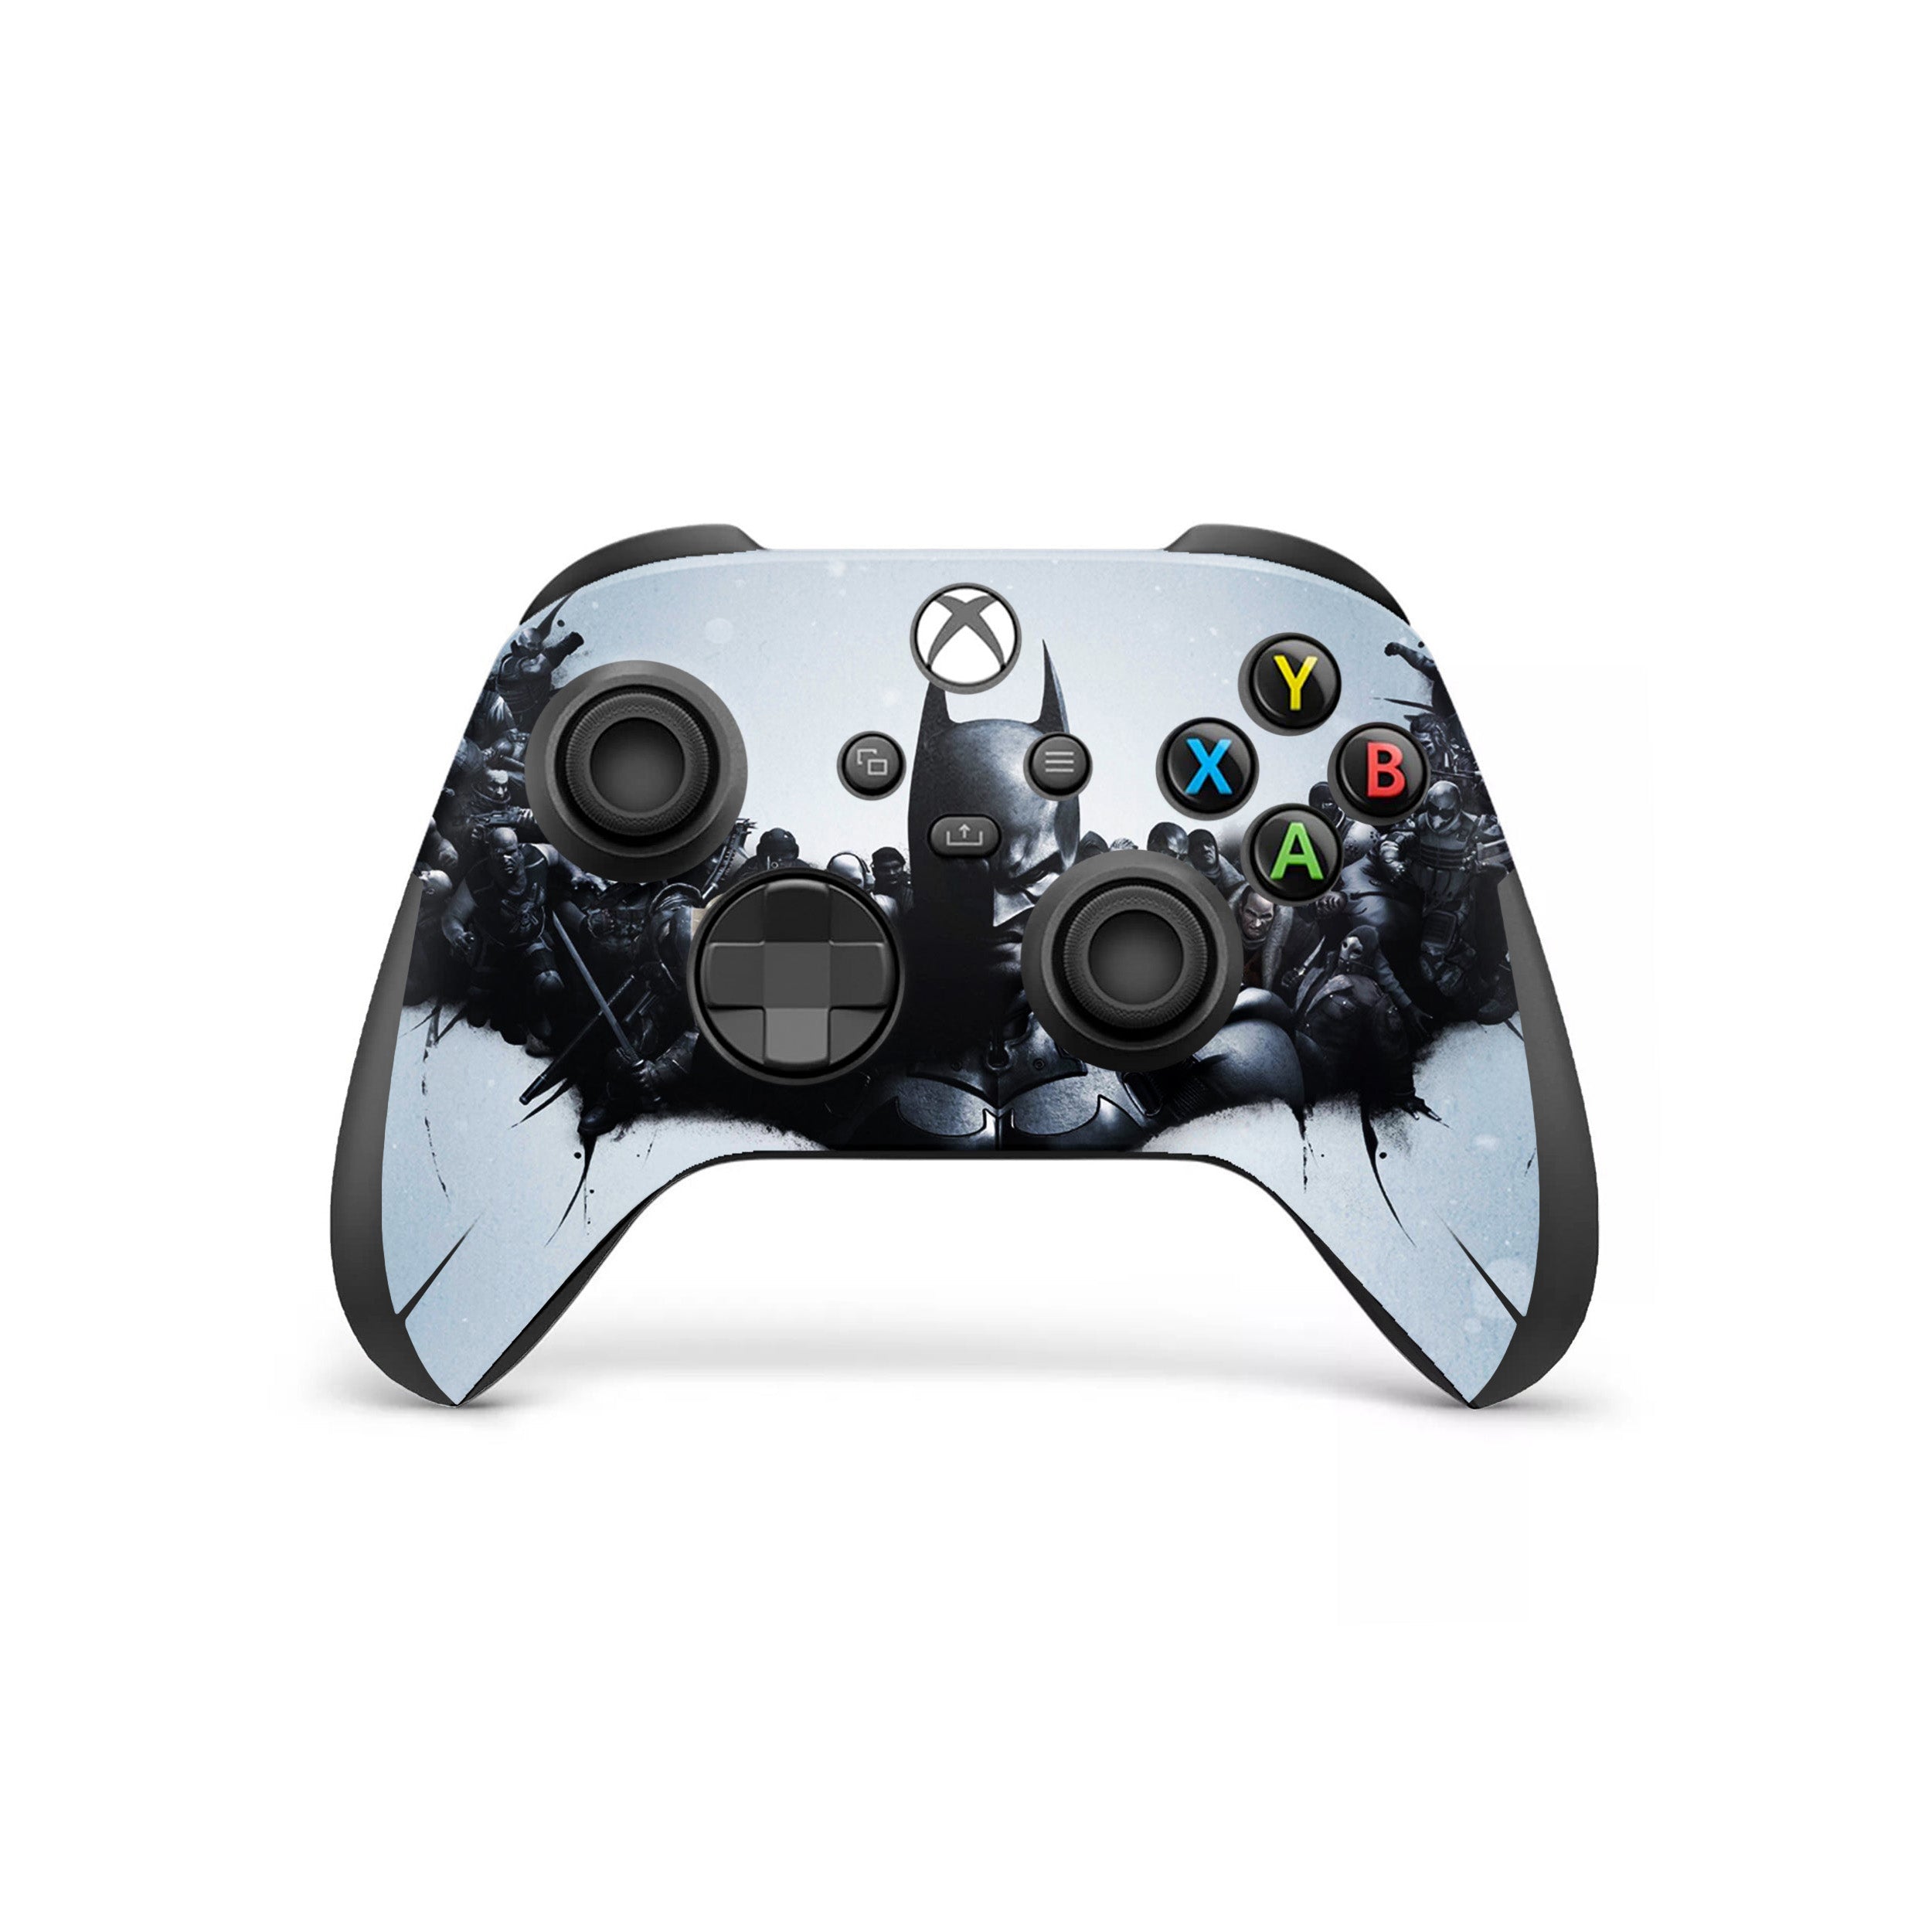 A video game skin featuring a DC Batman design for the Xbox Wireless Controller.